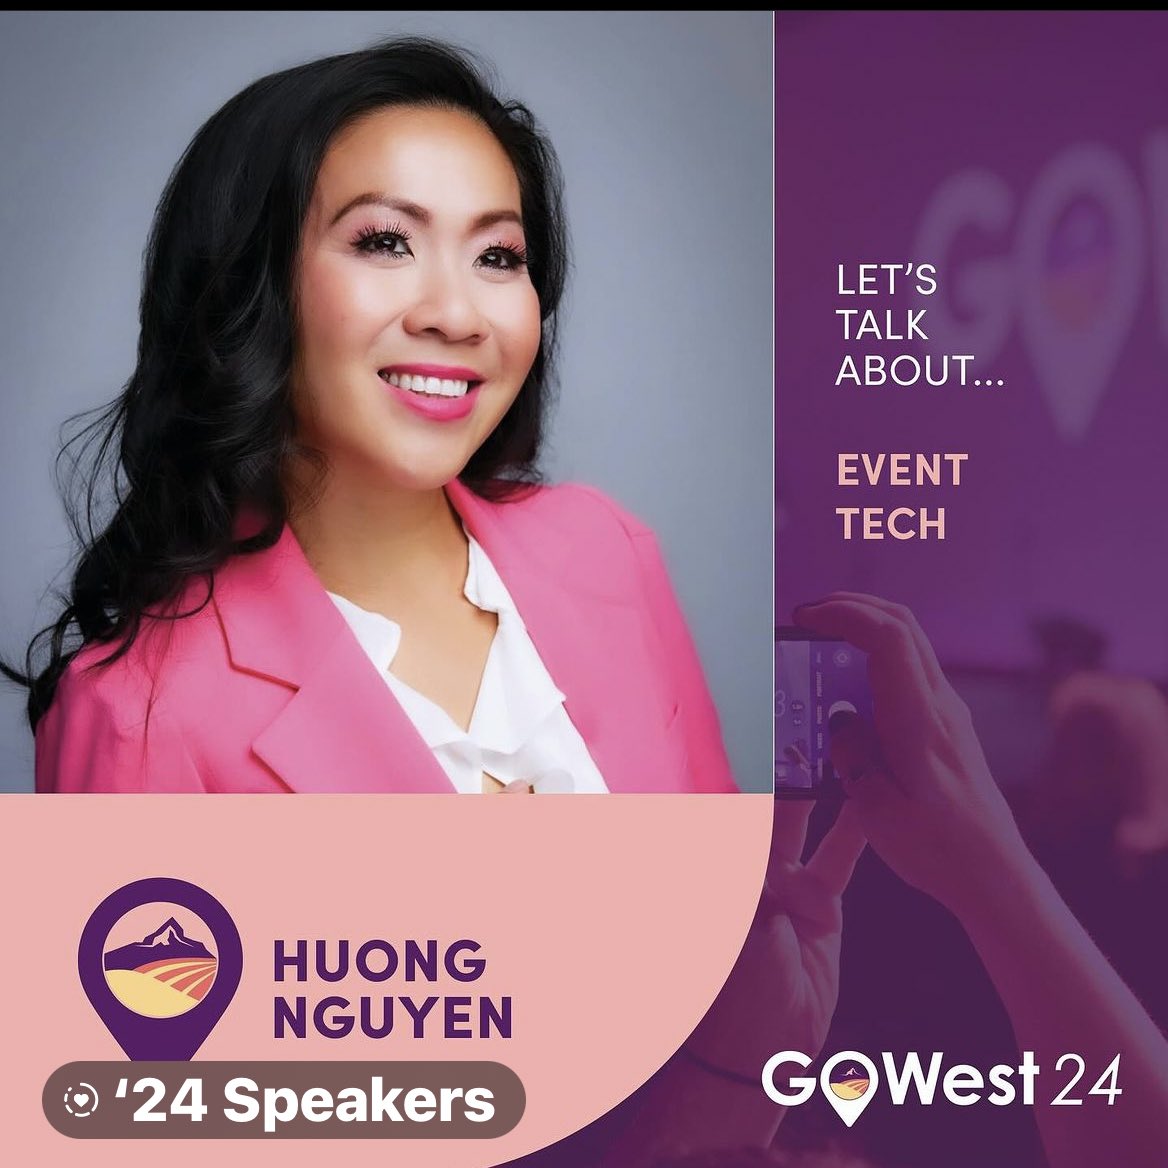 Let’s talk #EventTech with Huong Nguyen at #gowestlive Jan 29/30 🇨🇦